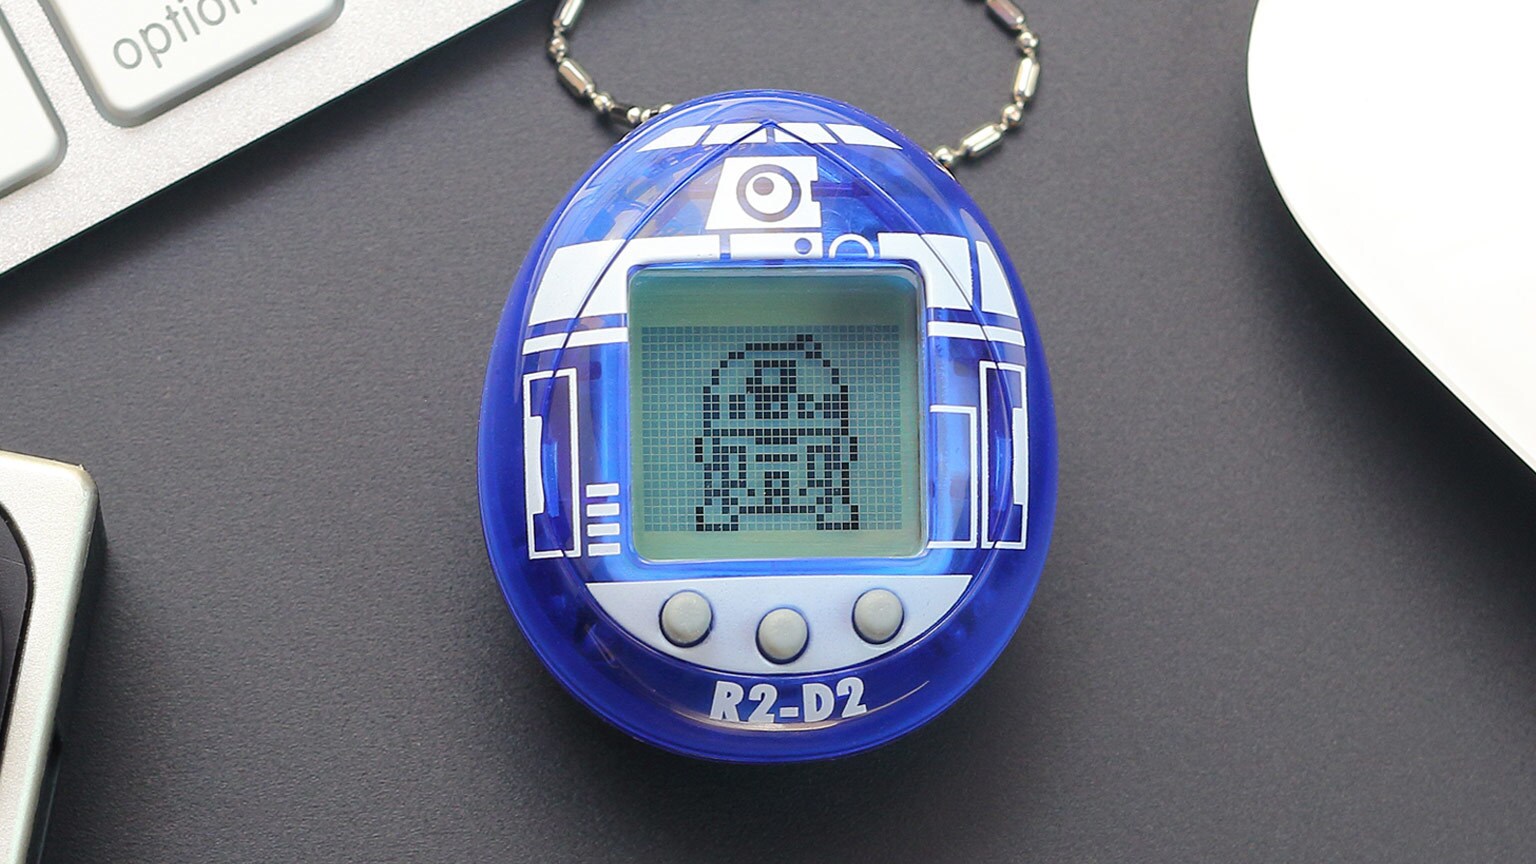 The New R2-D2 Tamagotchi is Here to Be Your Droid Buddy - Exclusive